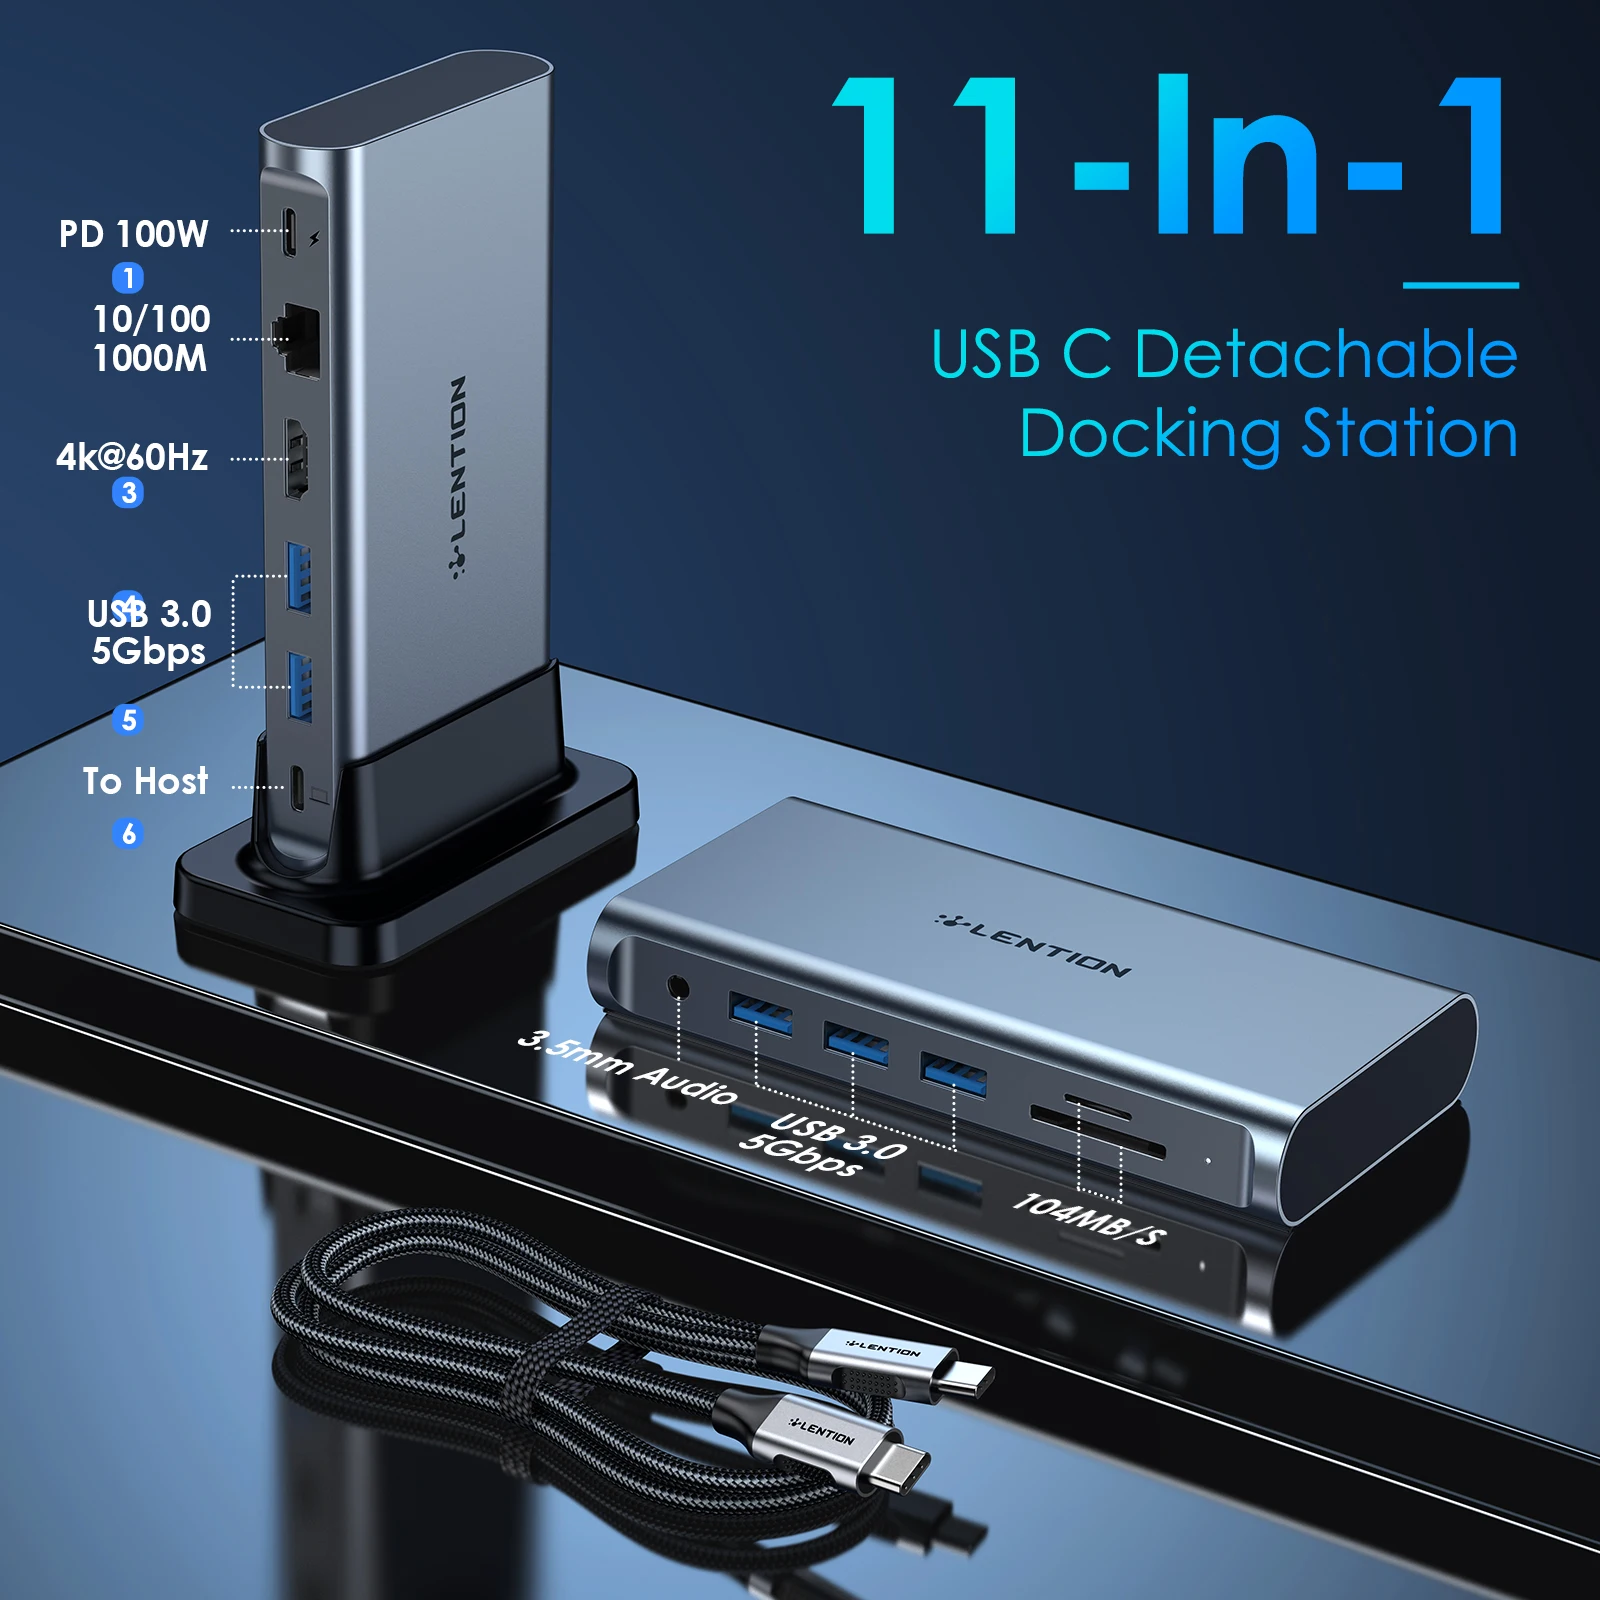 Docking Station USB C HUB 11 in 1 4K60hz HDMI Adapter PD100W SD/TF RJ45 1000Mbps Adapter For New Macbook Air/Pro/M1/M2 Surface